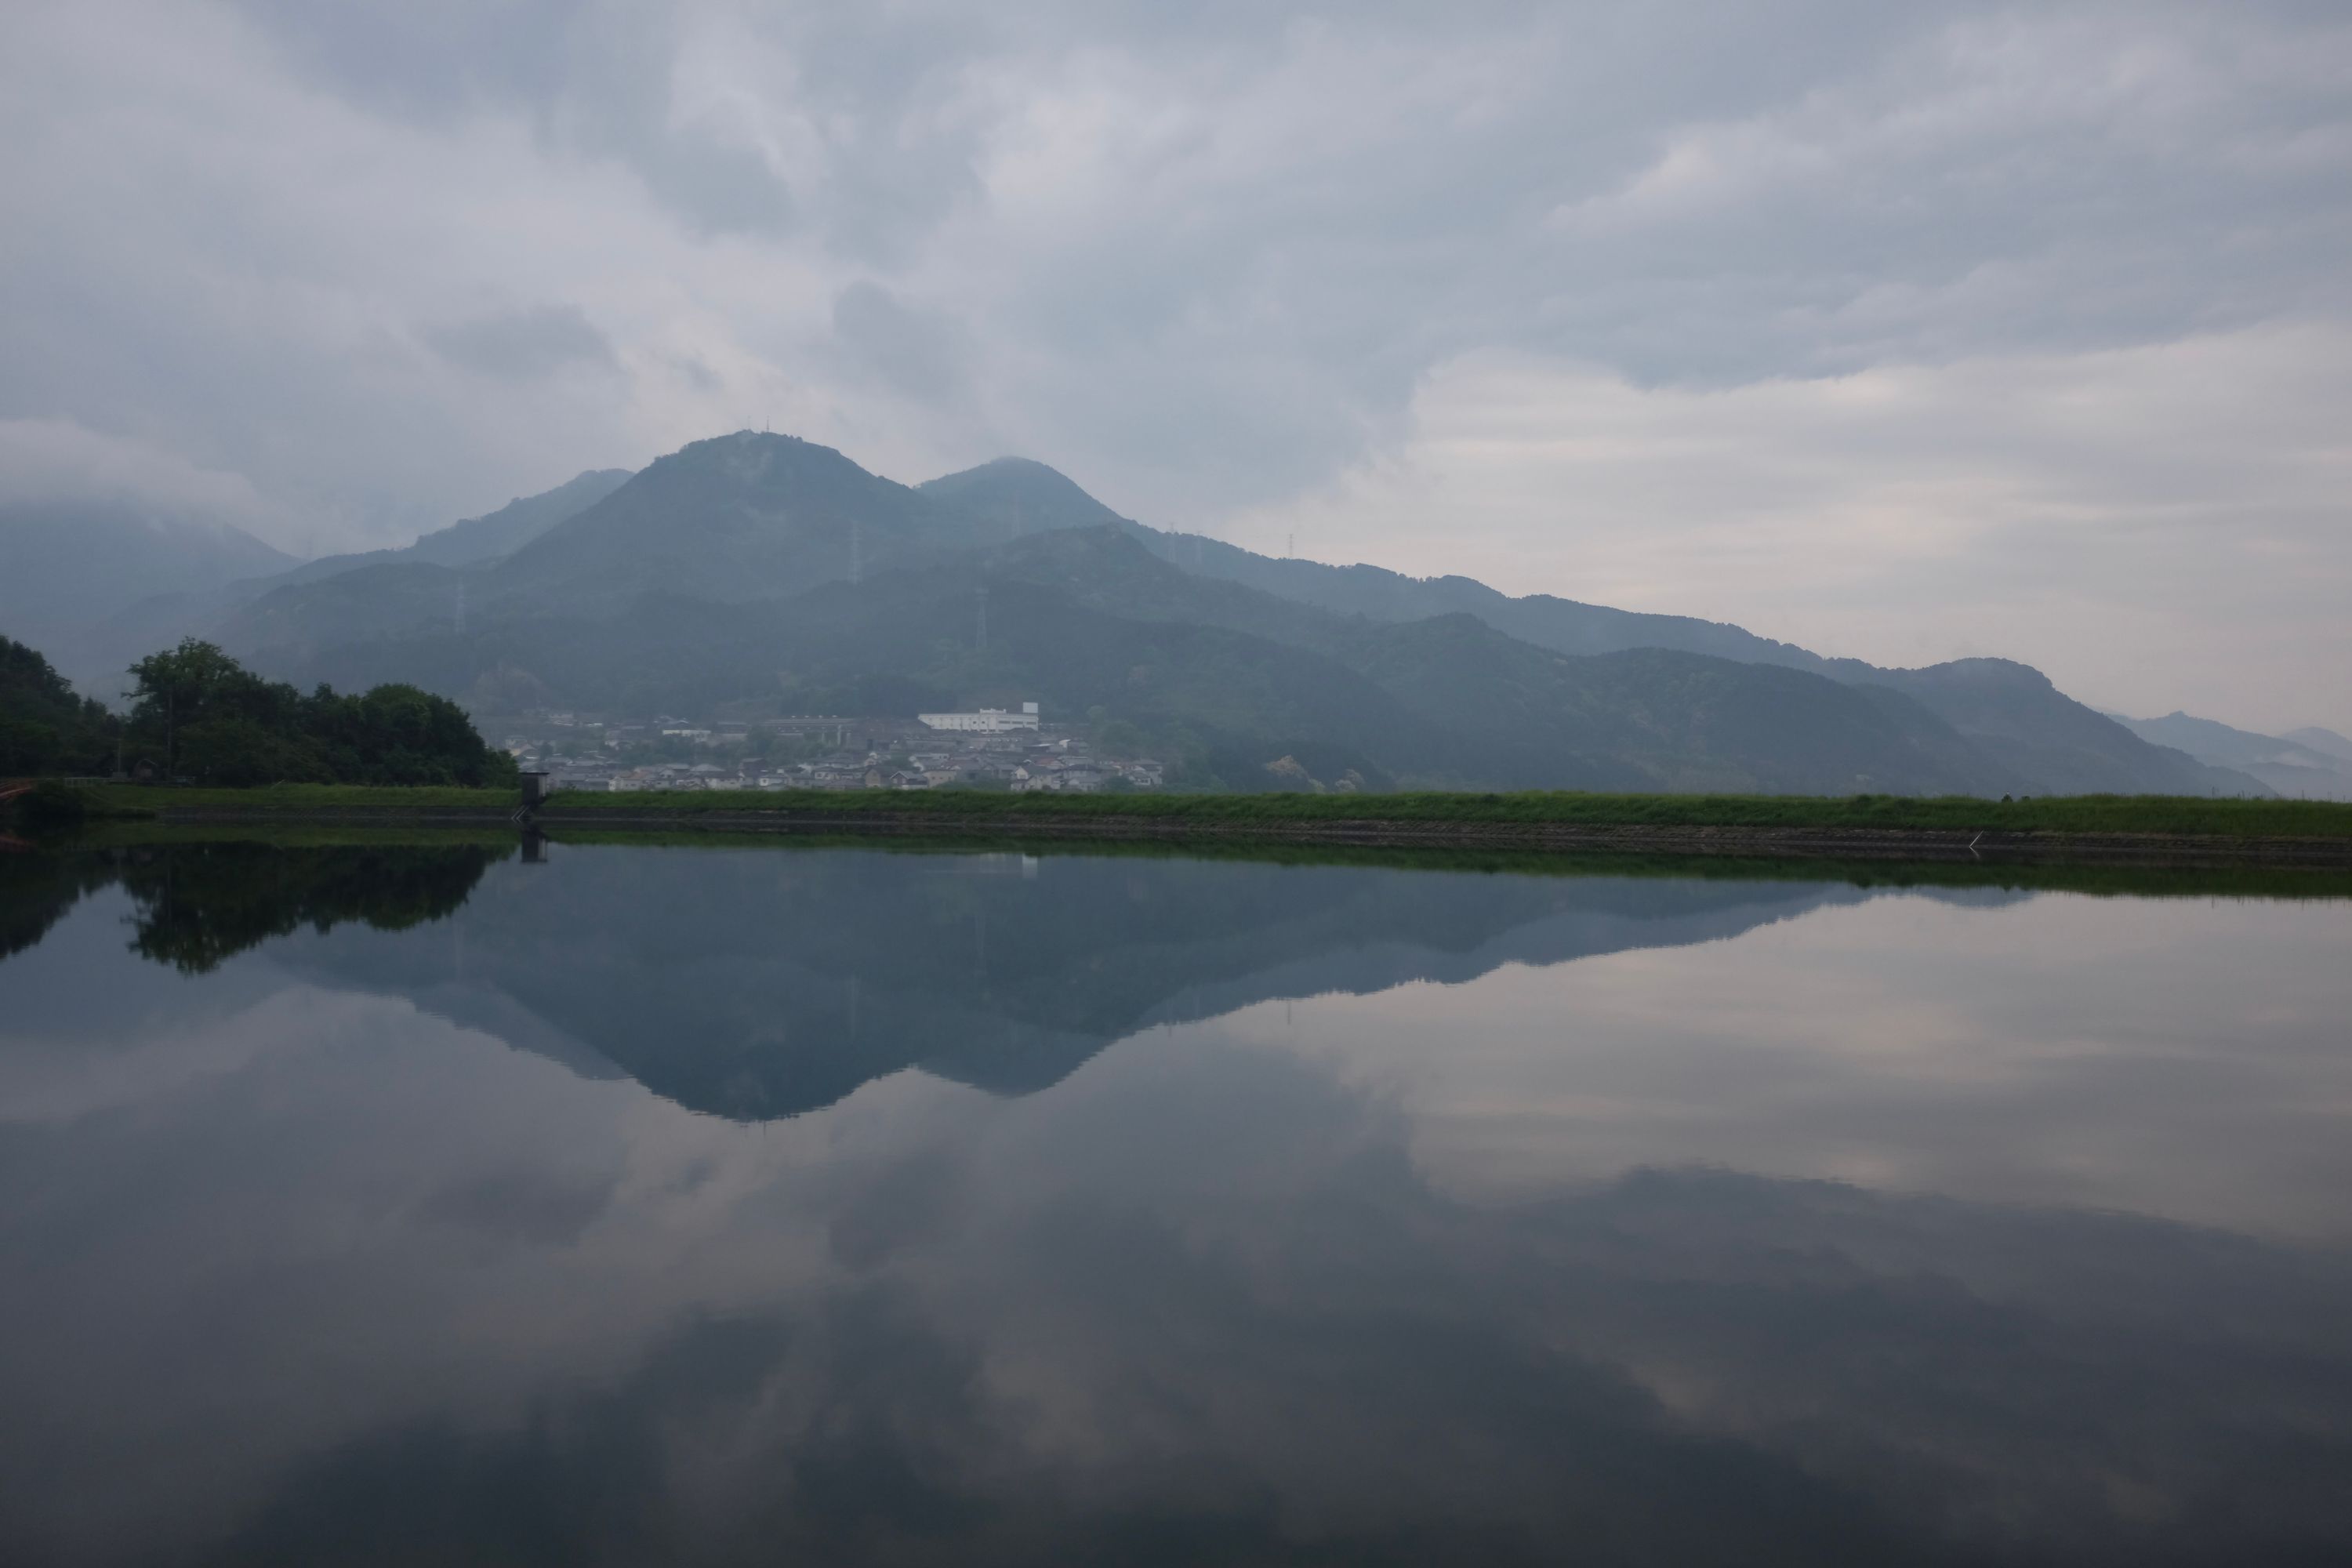 Mountains reflected in a flooded rice field under a cloudy sky.